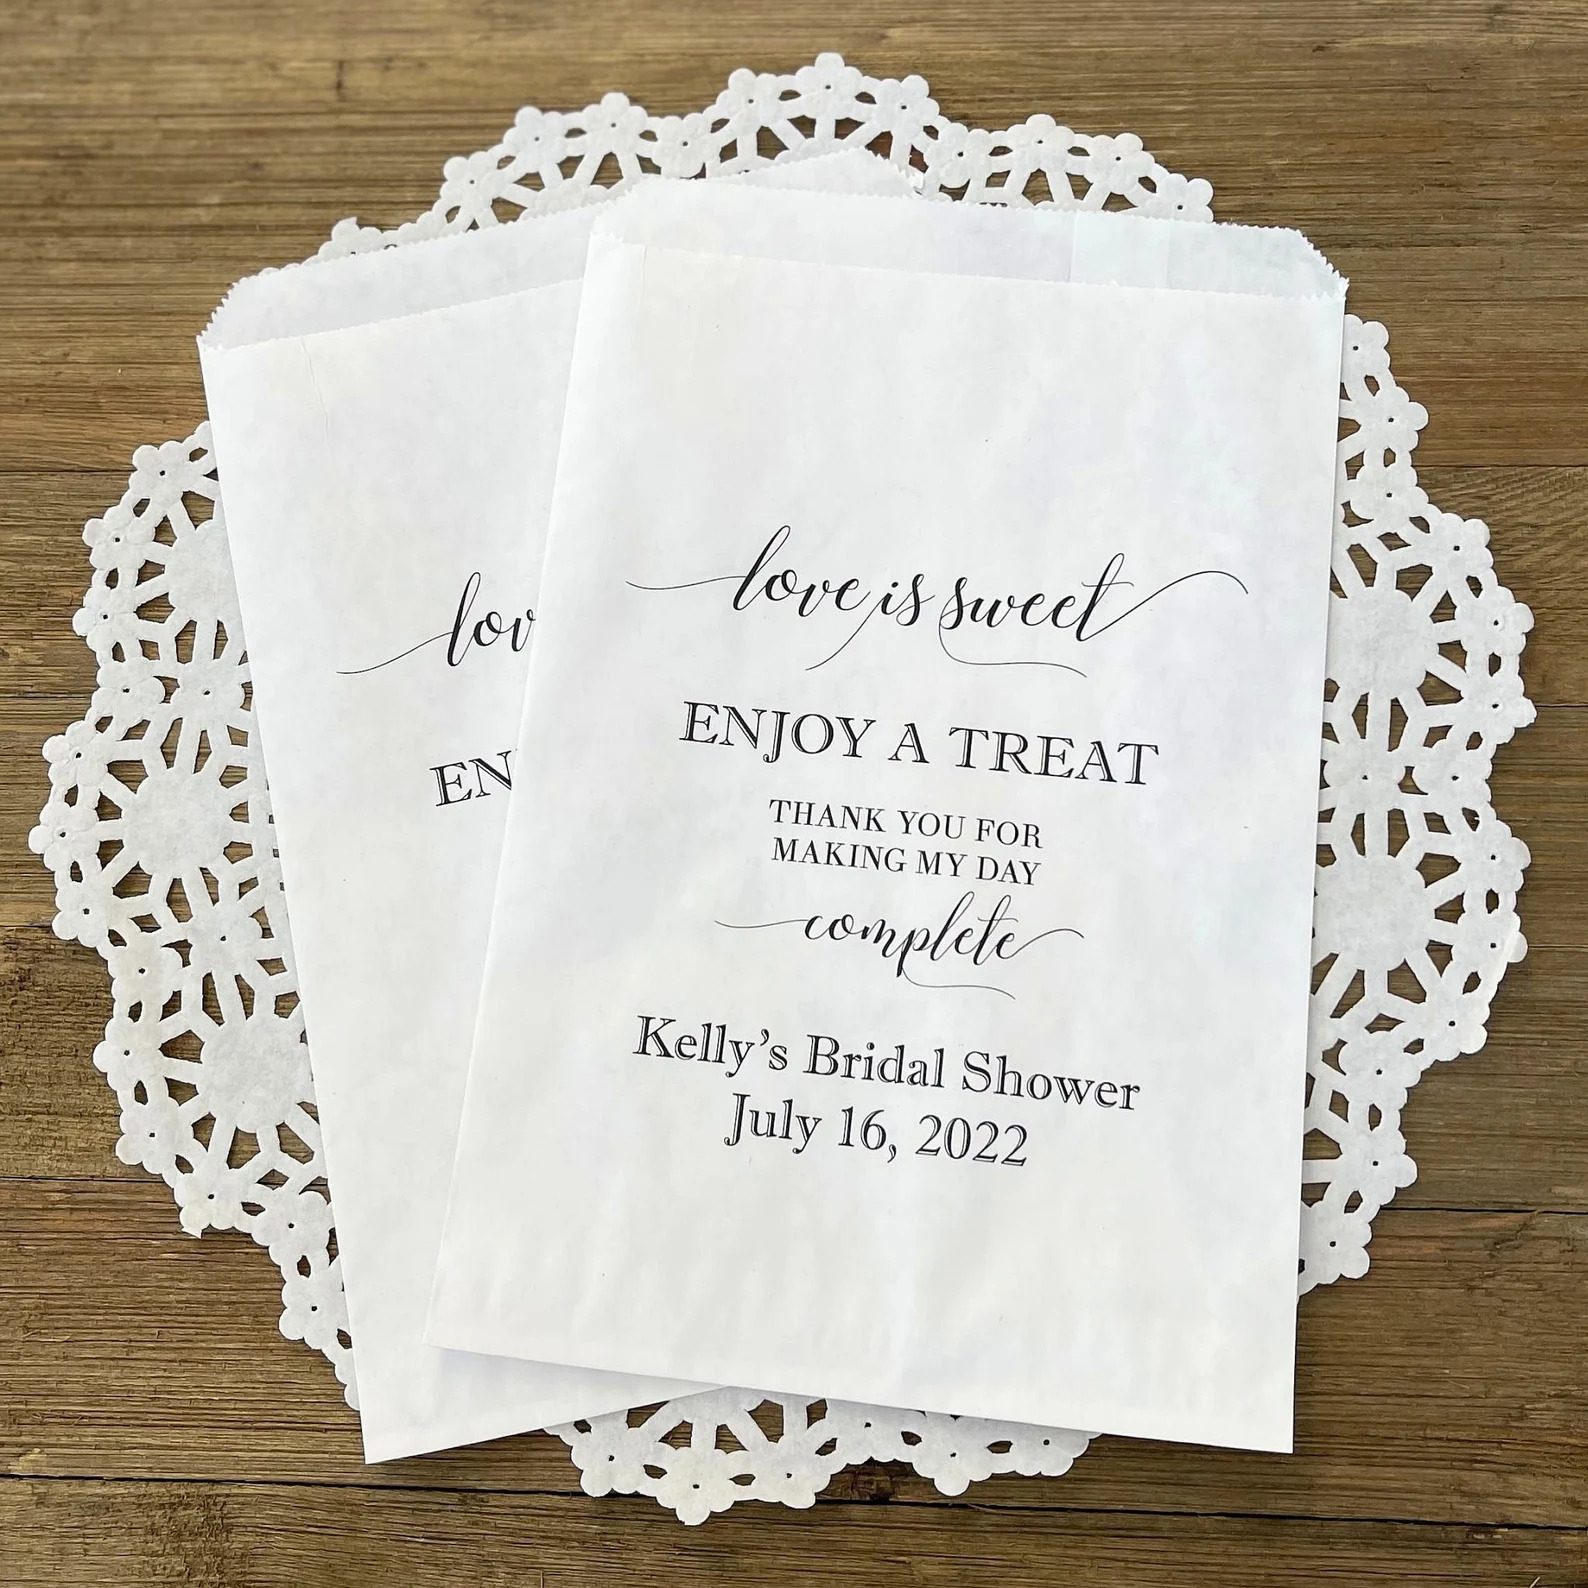 DIY Bridal Shower Stationery & Personalized Gifts - Party Ideas